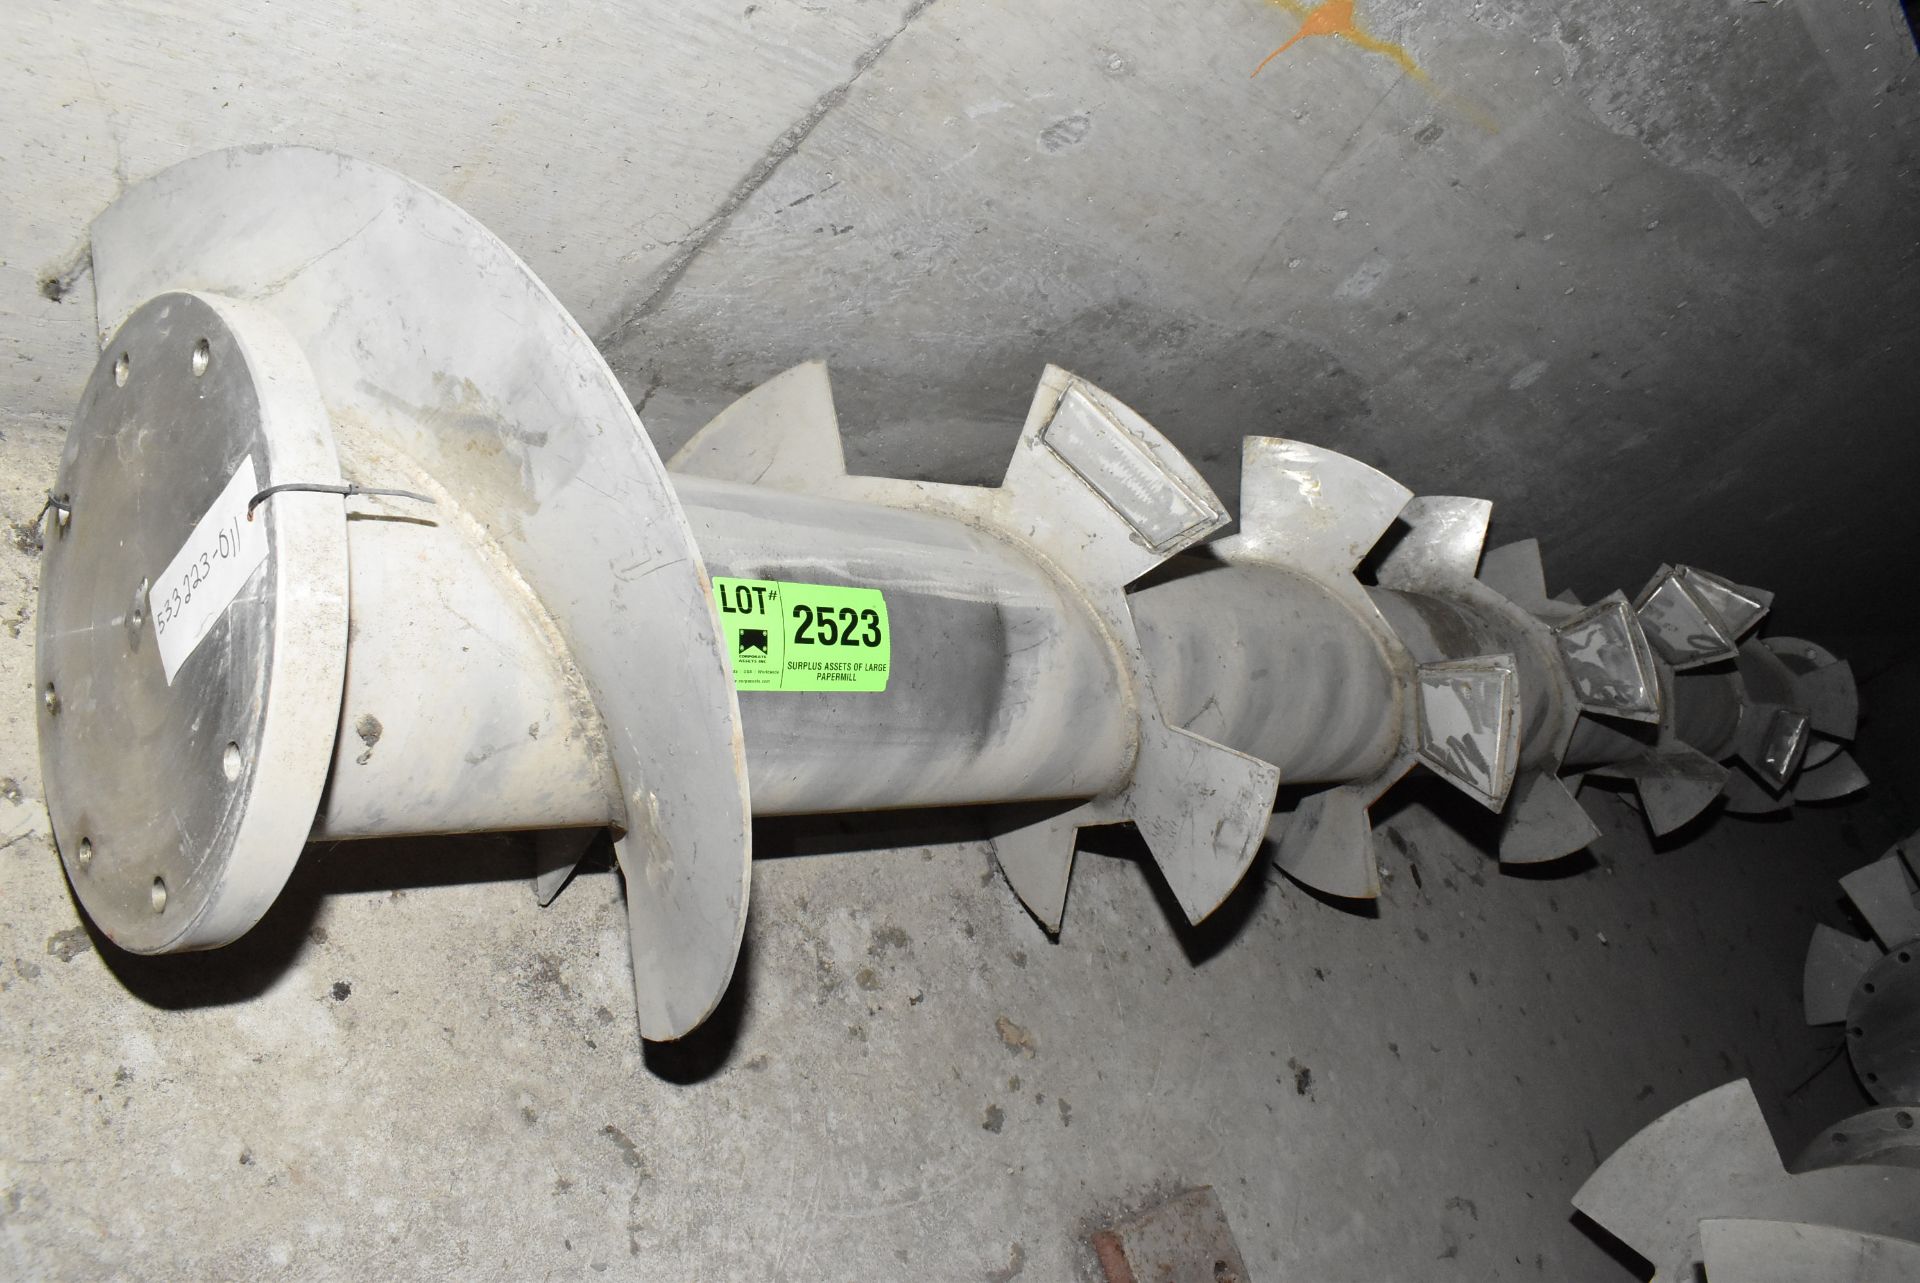 MFG. UNKNOWN 190" STAINLESS STEEL AUGER (CI) [RIGGING FEE FOR LOT #2523 - $150 USD PLUS APPLICABLE